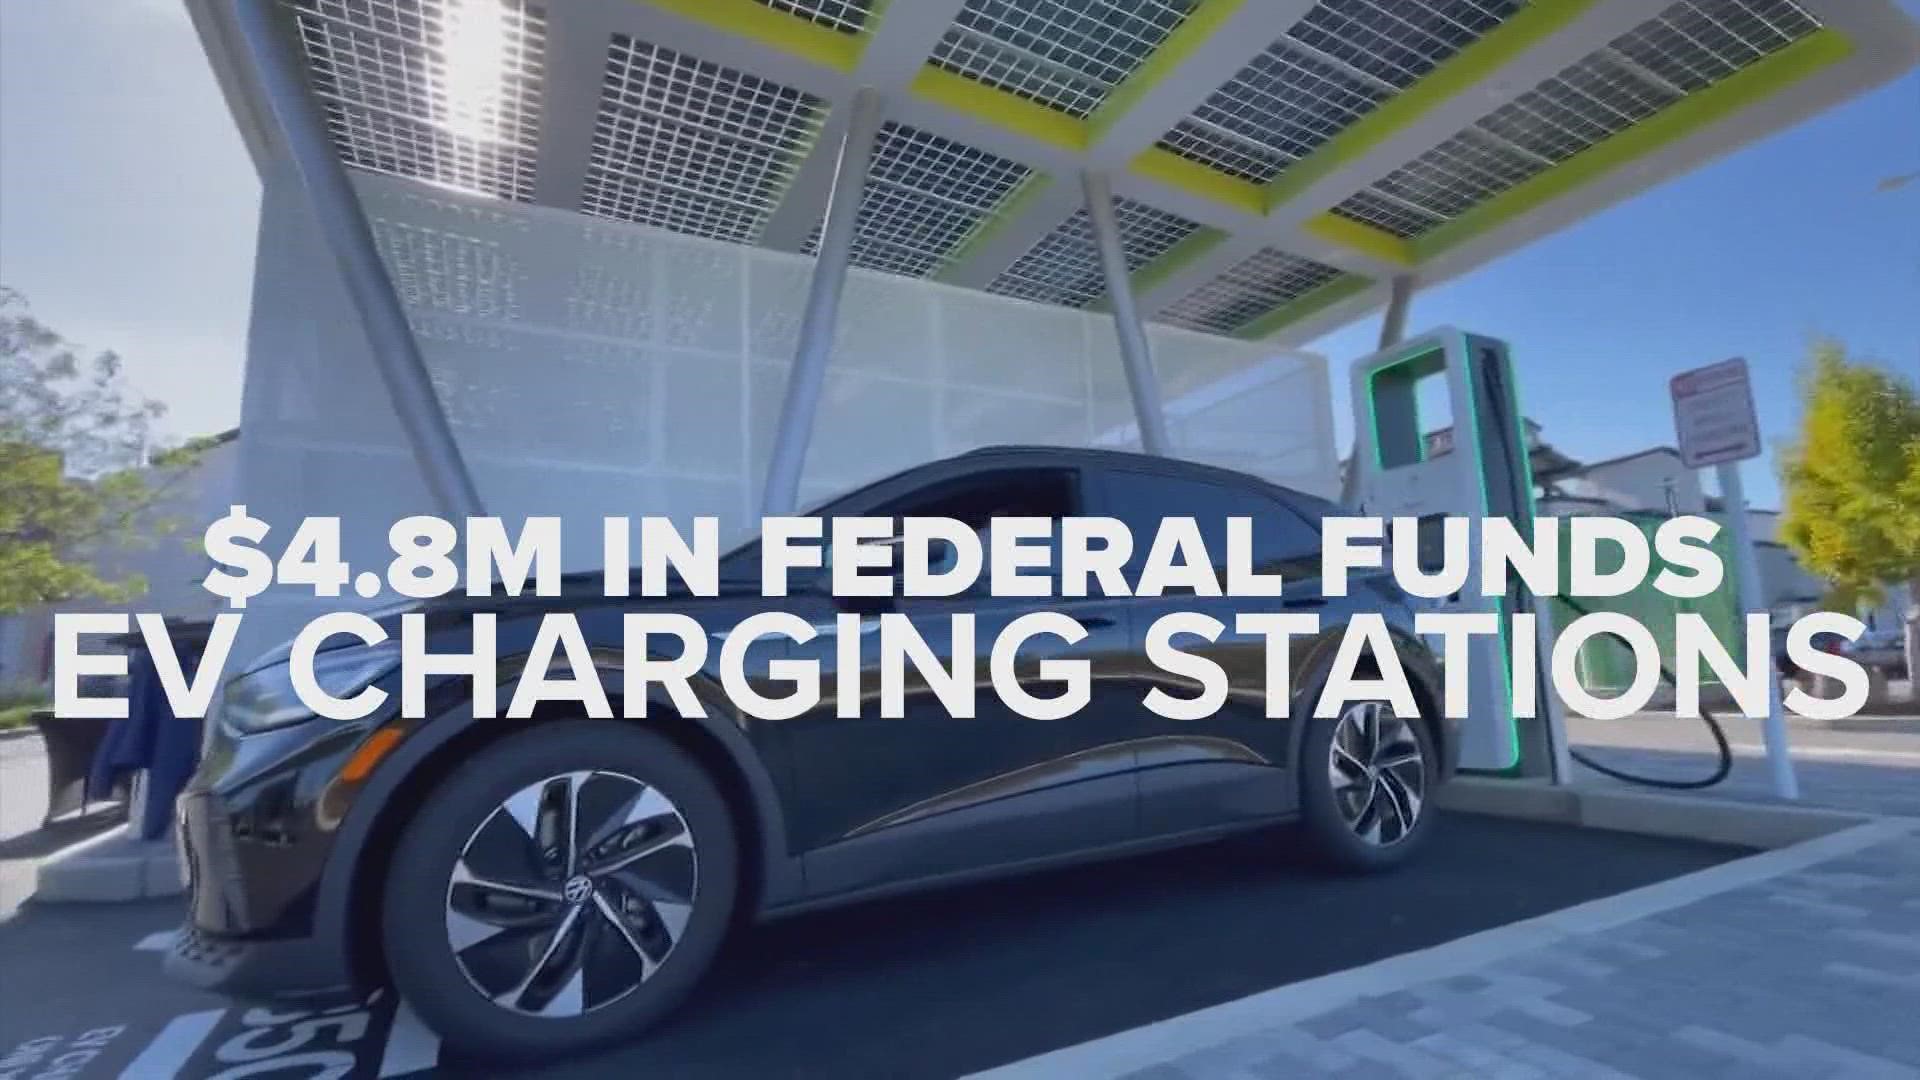 With $408 million in federal funds, the state wants to build enough charging stations to support 1 million electric vehicles.